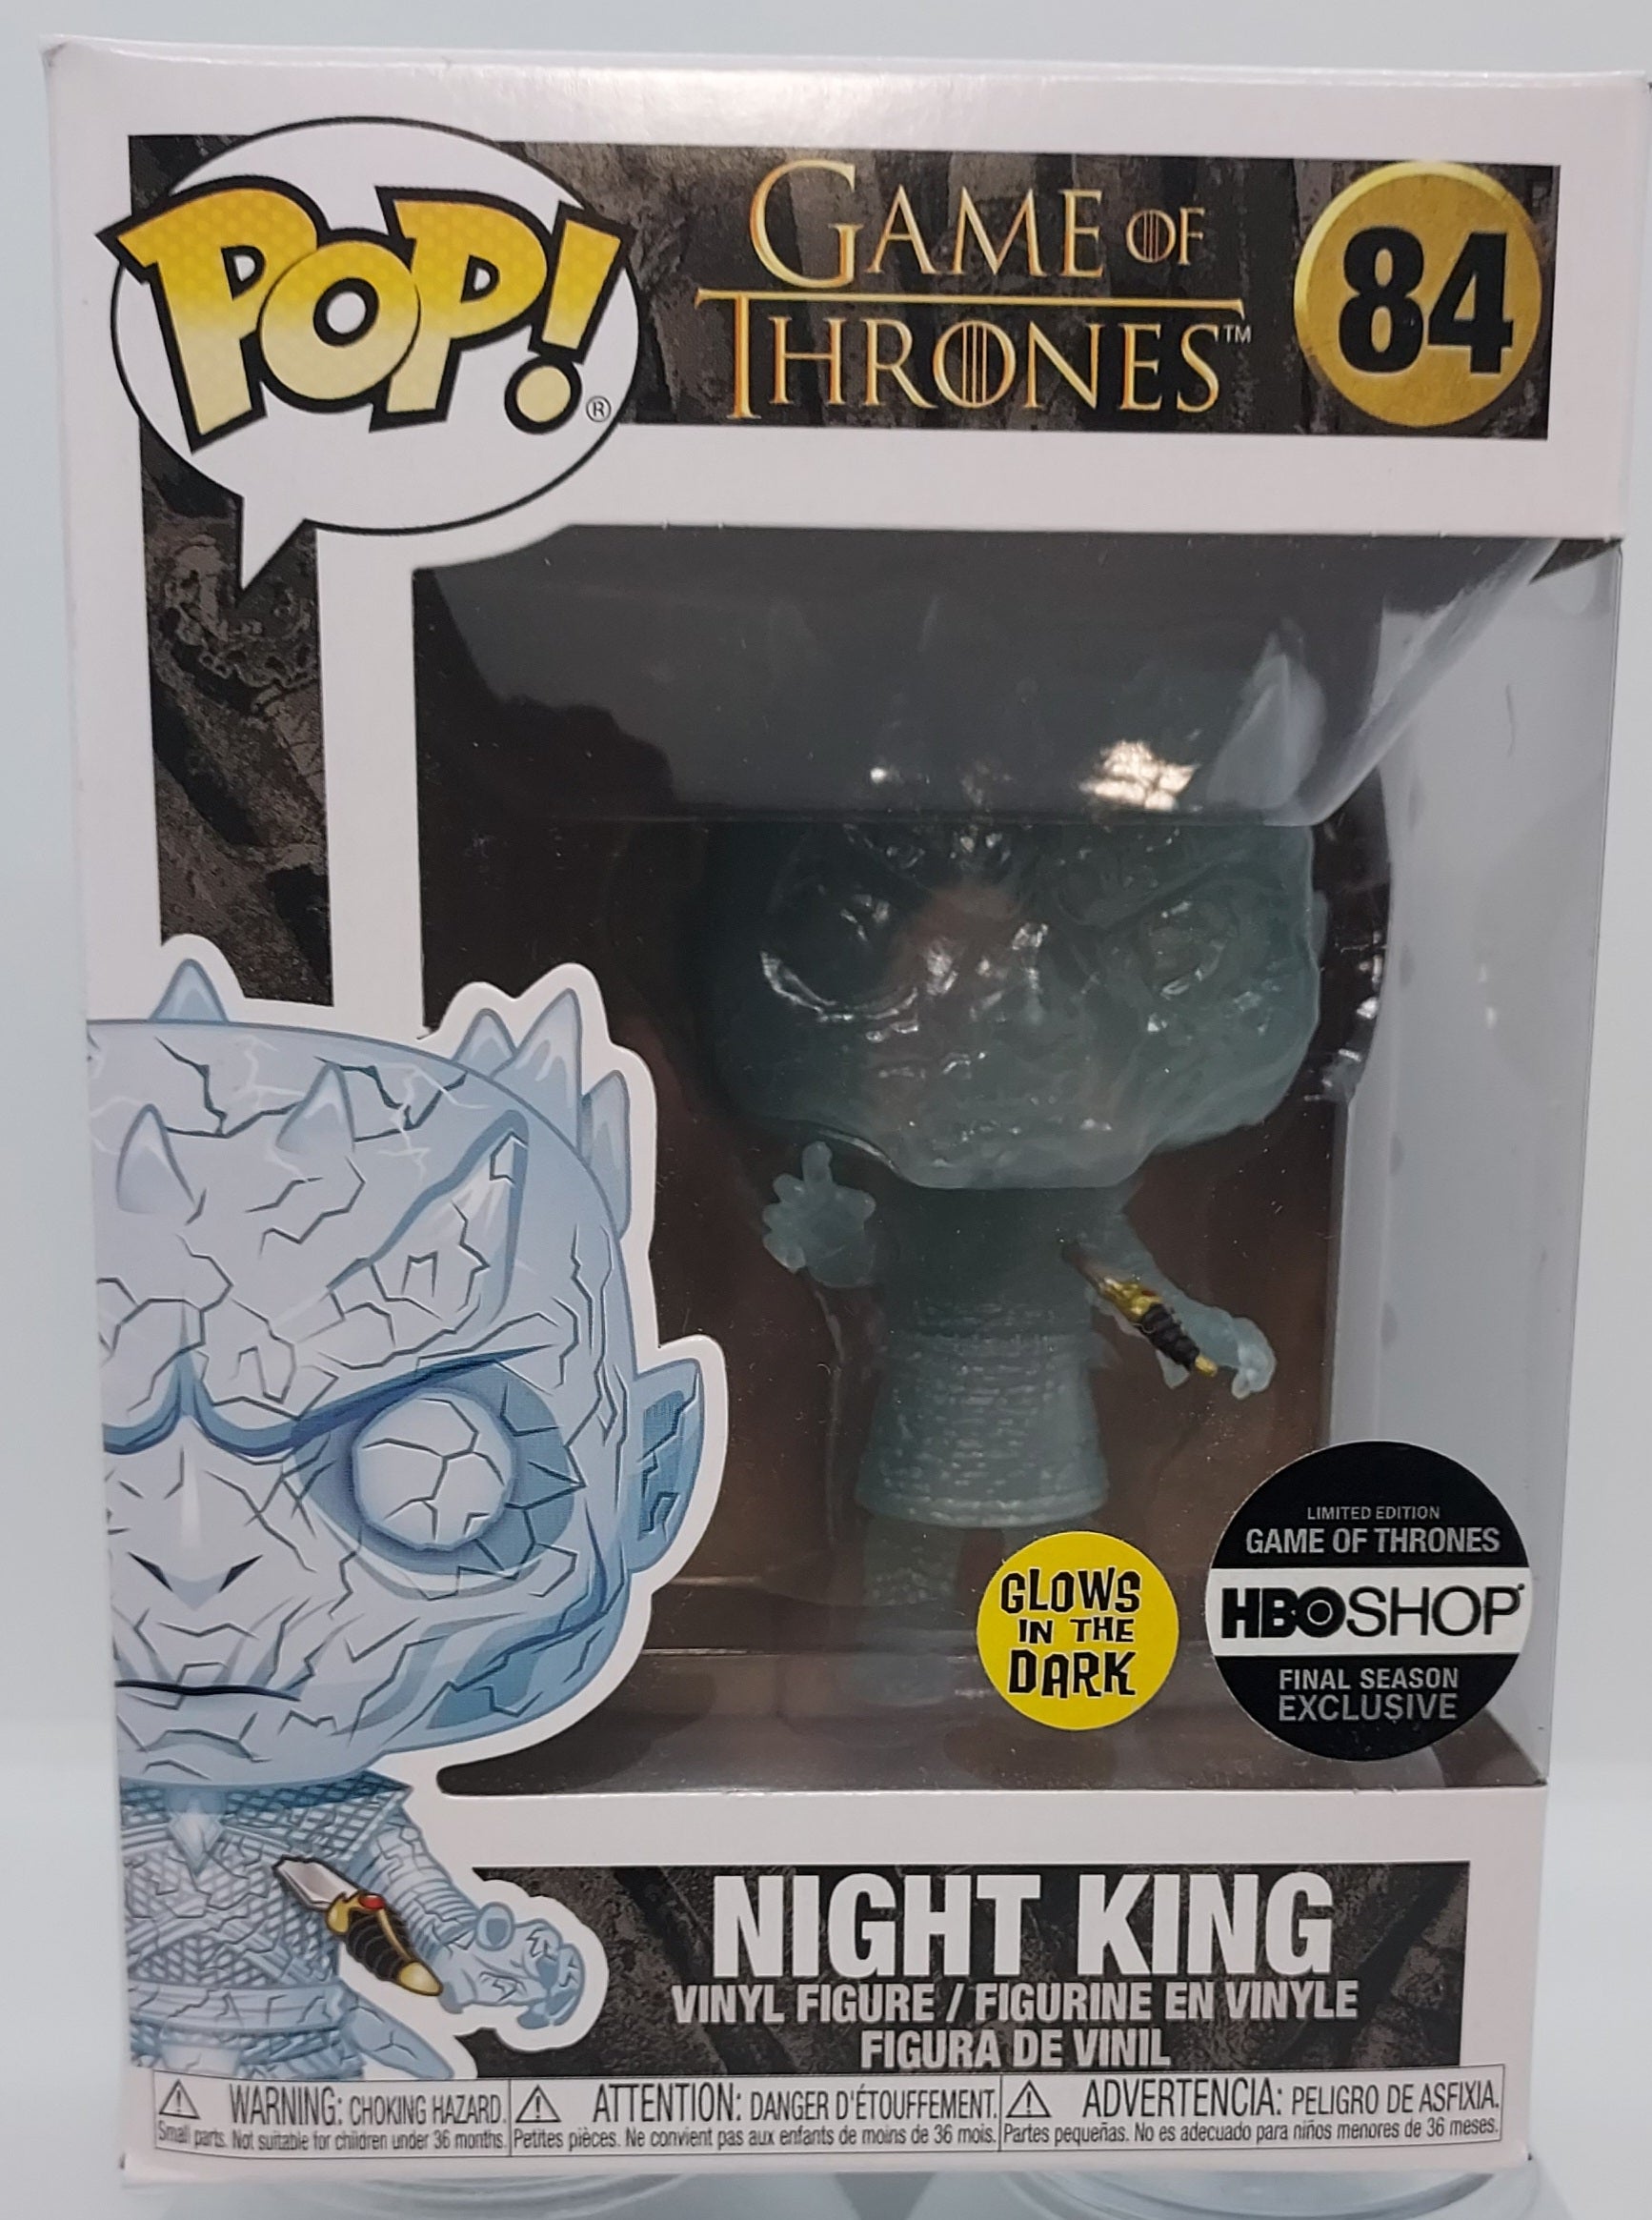 Bobblehead Figure Game of Thrones Night King HBO Shop #84 – The